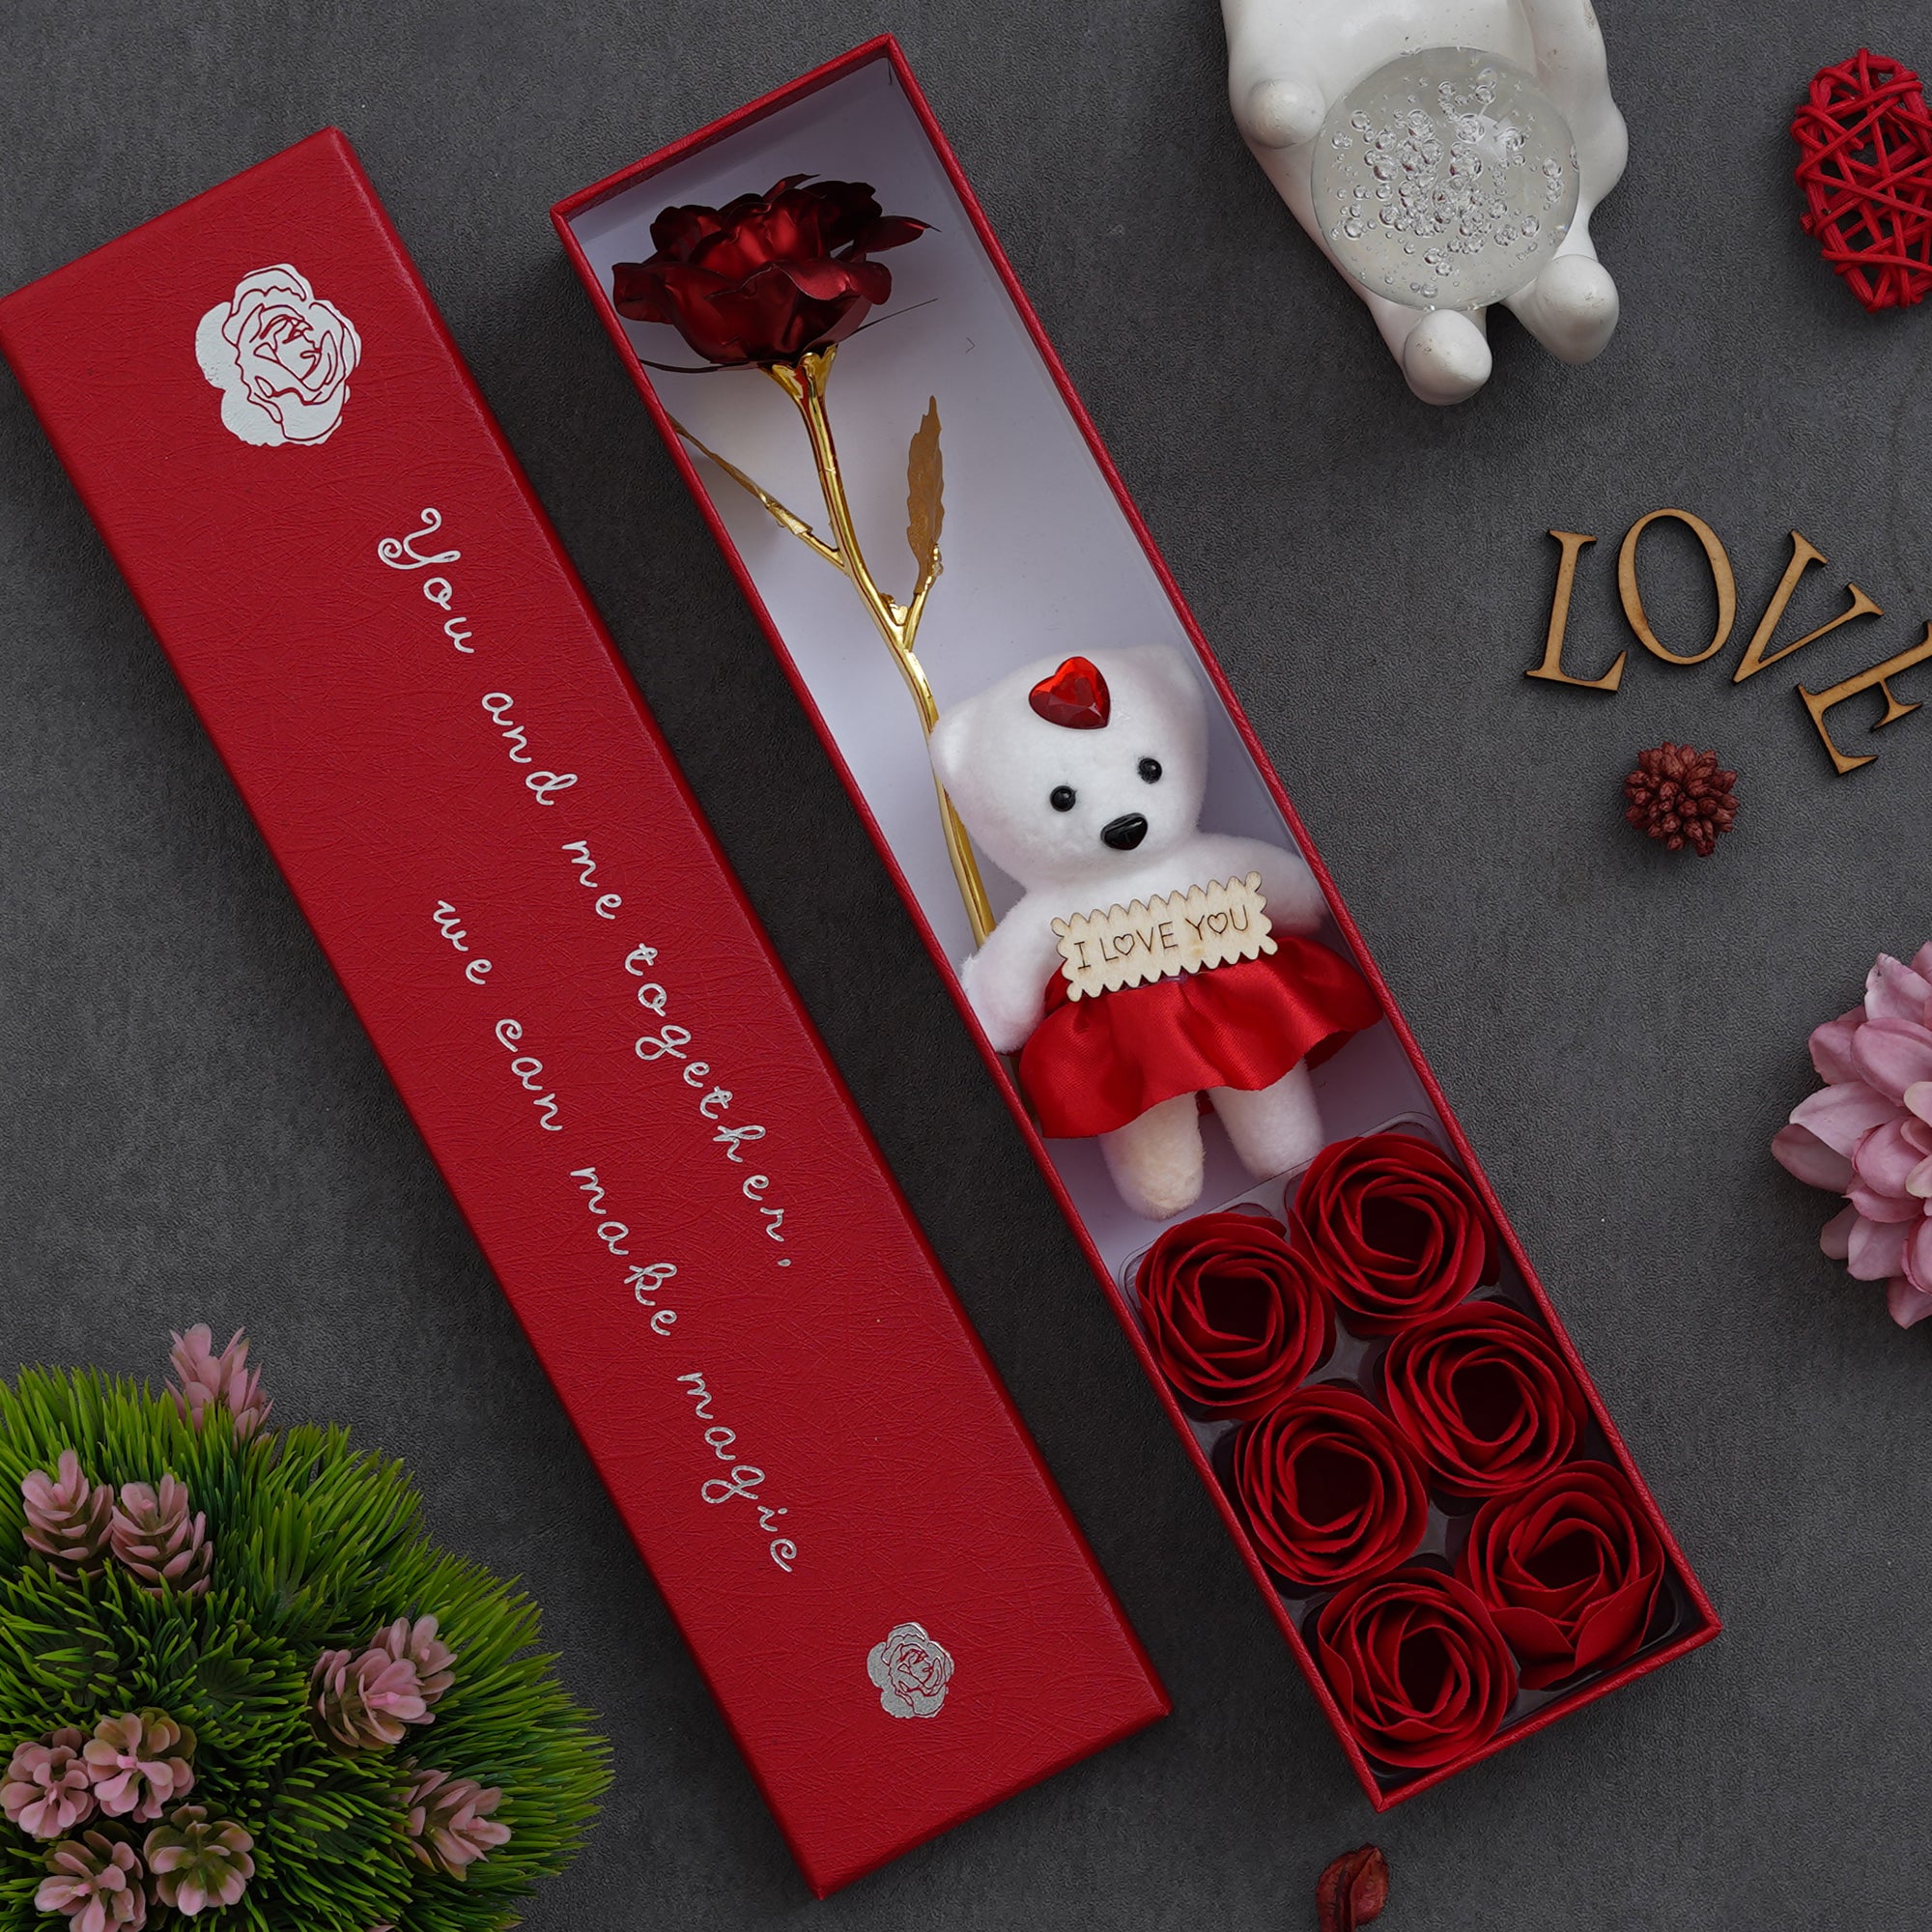 Valentine Combo of Set of 8 Love Post Cards Gift Cards Set, Red Gift Box with Teddy & Roses, "20 Reasons Why I Love You" Printed on Little Hearts Wooden Gift Set 3